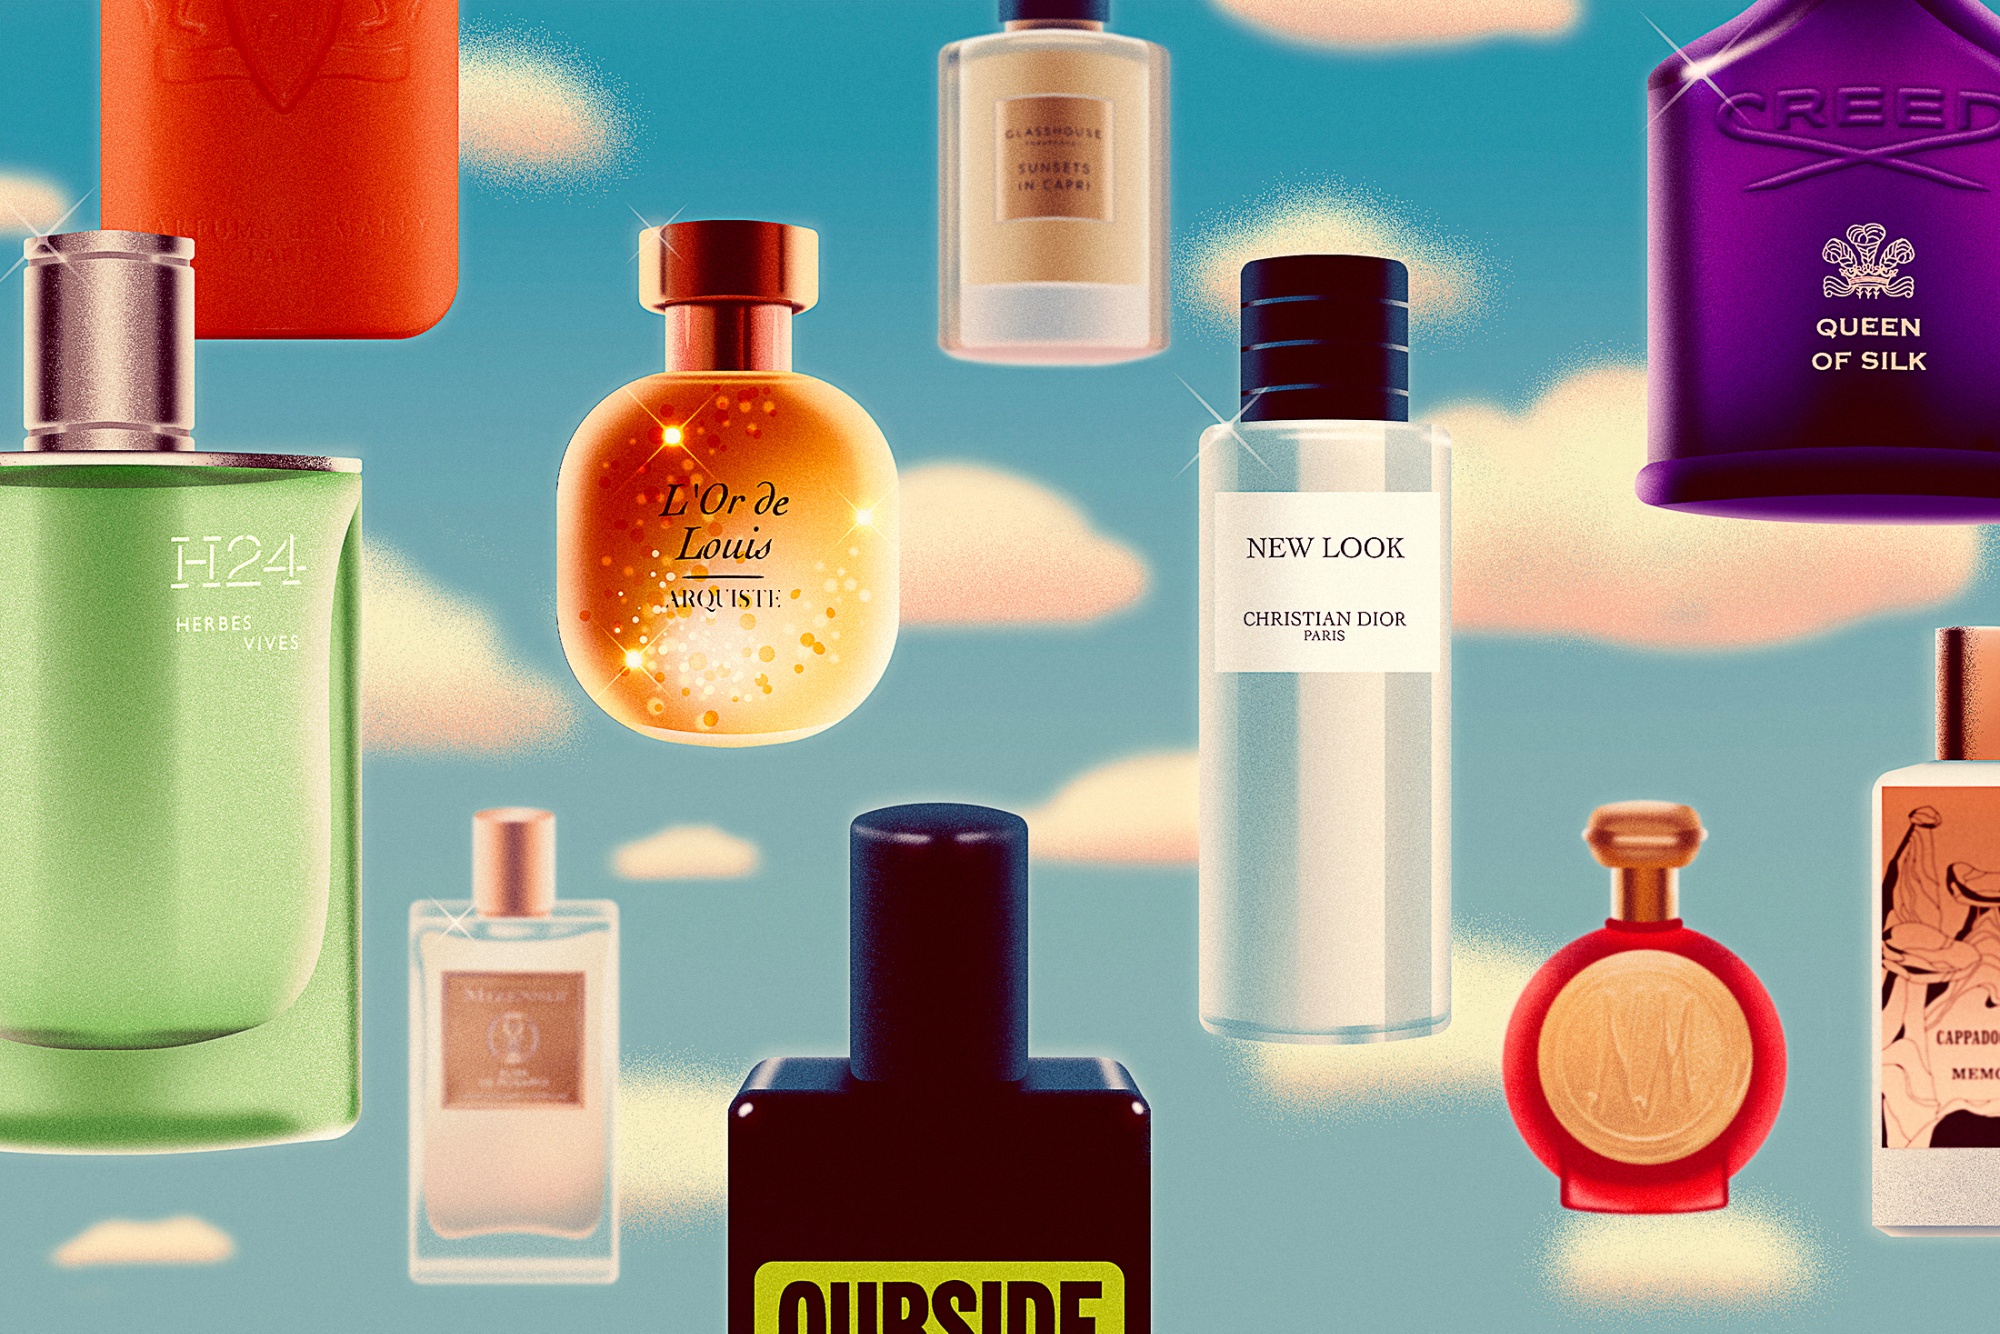 Sales of Fine Fragrance Are Up, Driven by Gen Z Quest to Smell Rich -  Bloomberg